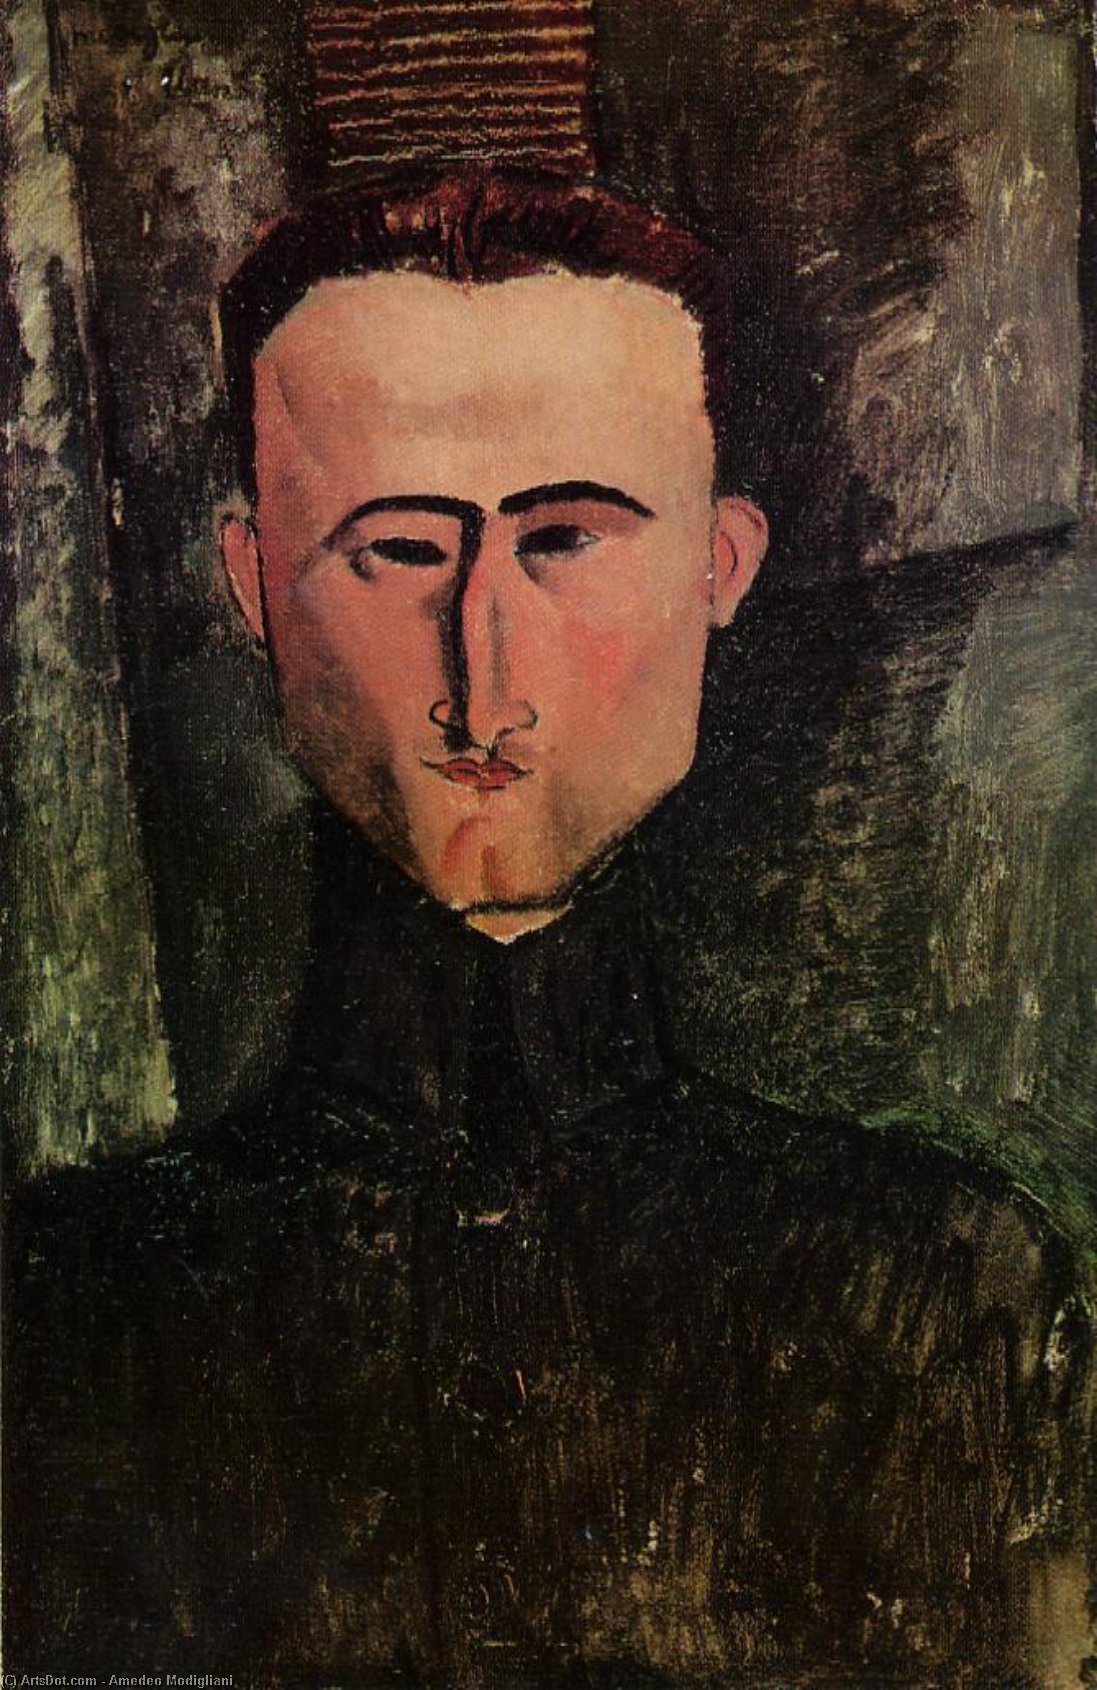 WikiOO.org - 백과 사전 - 회화, 삽화 Amedeo Modigliani - Andre Rouveyre